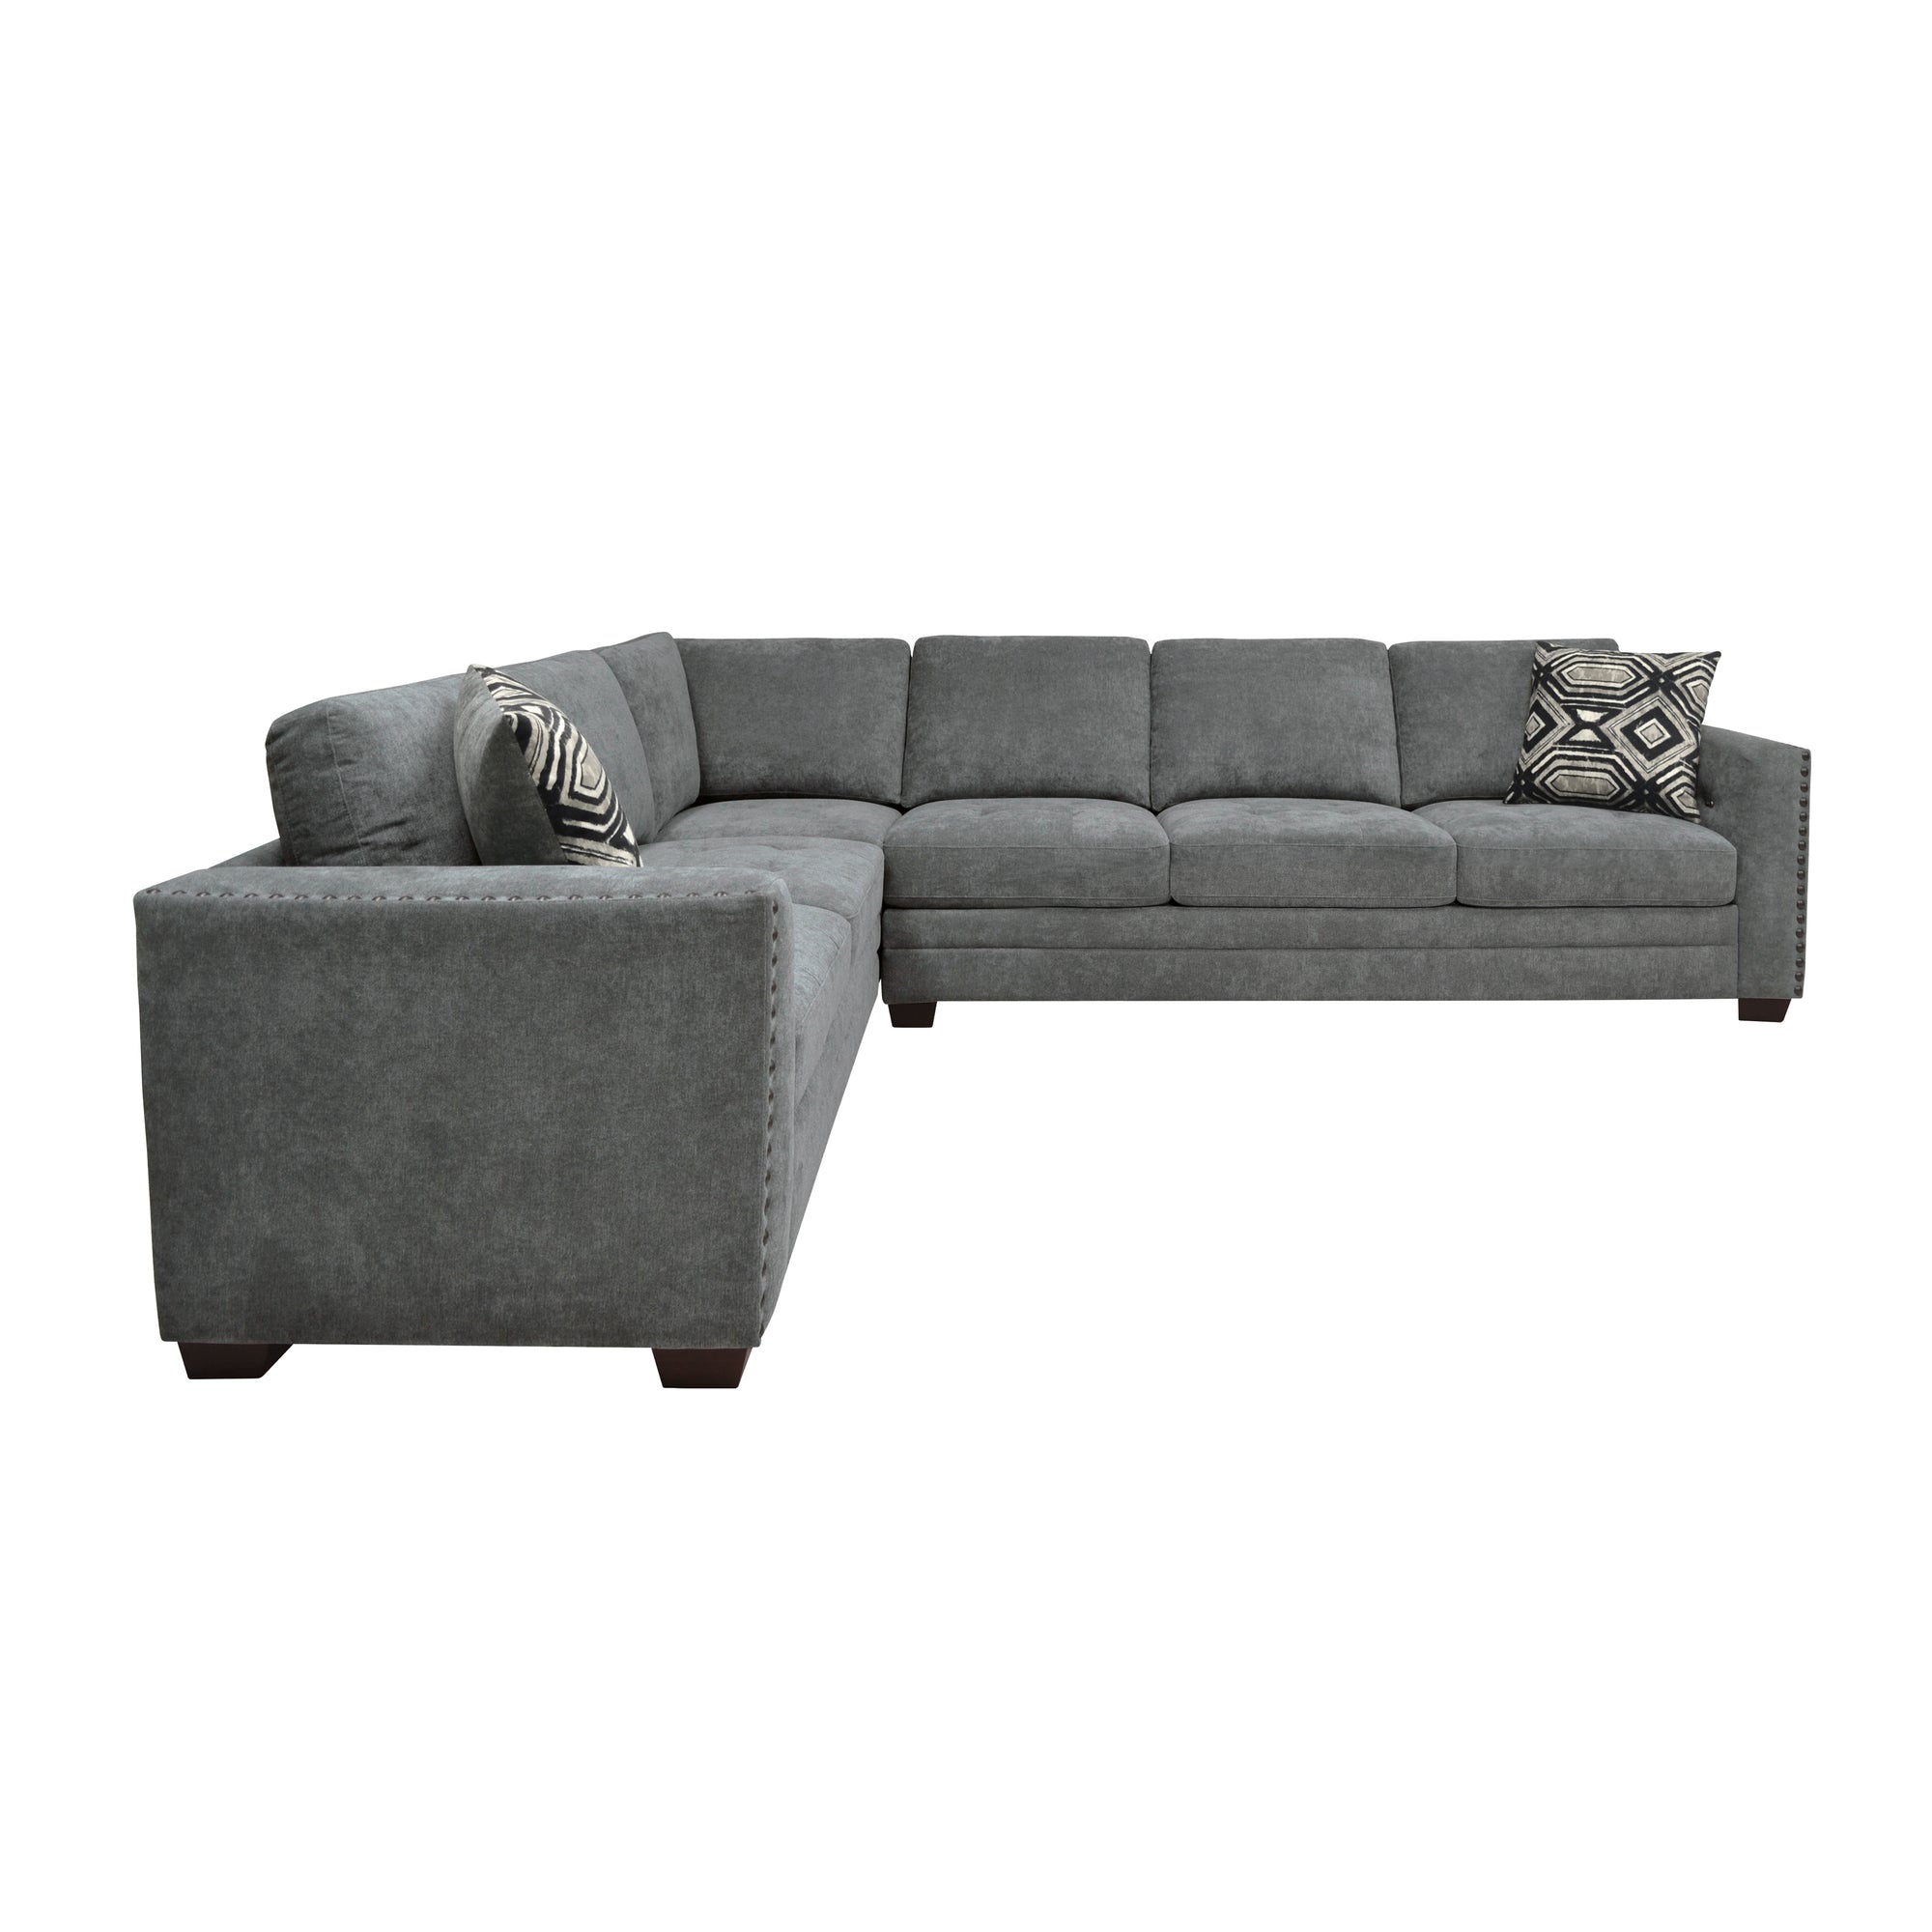 Riverdale 2-Piece Sectional Sofa